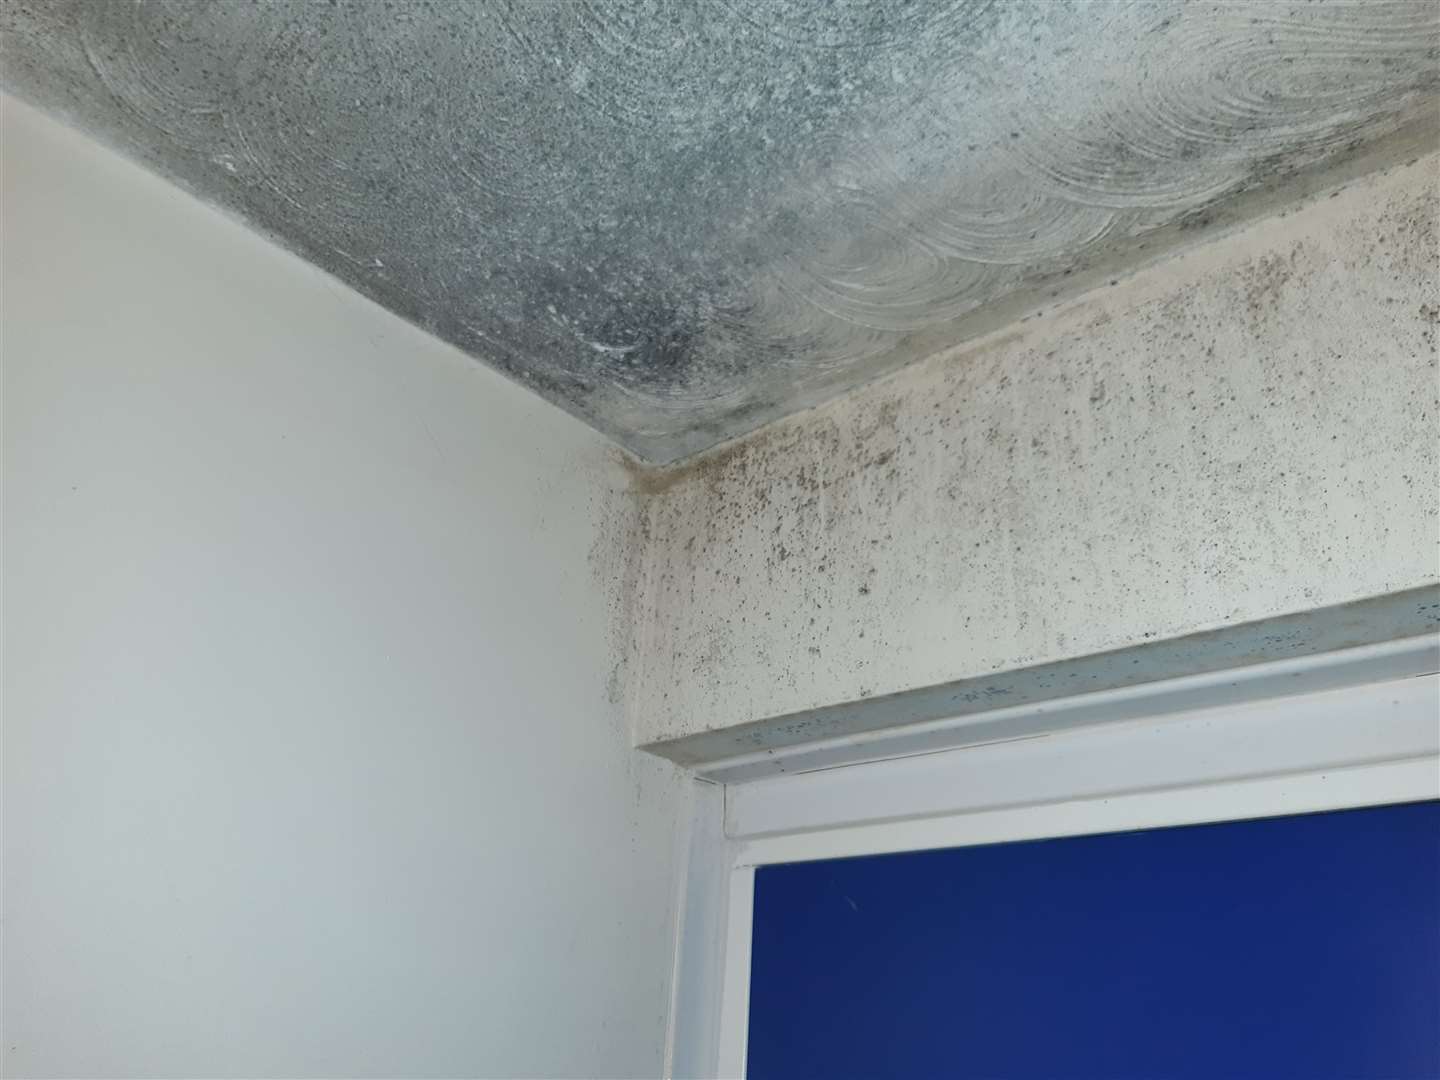 Mould above the front door